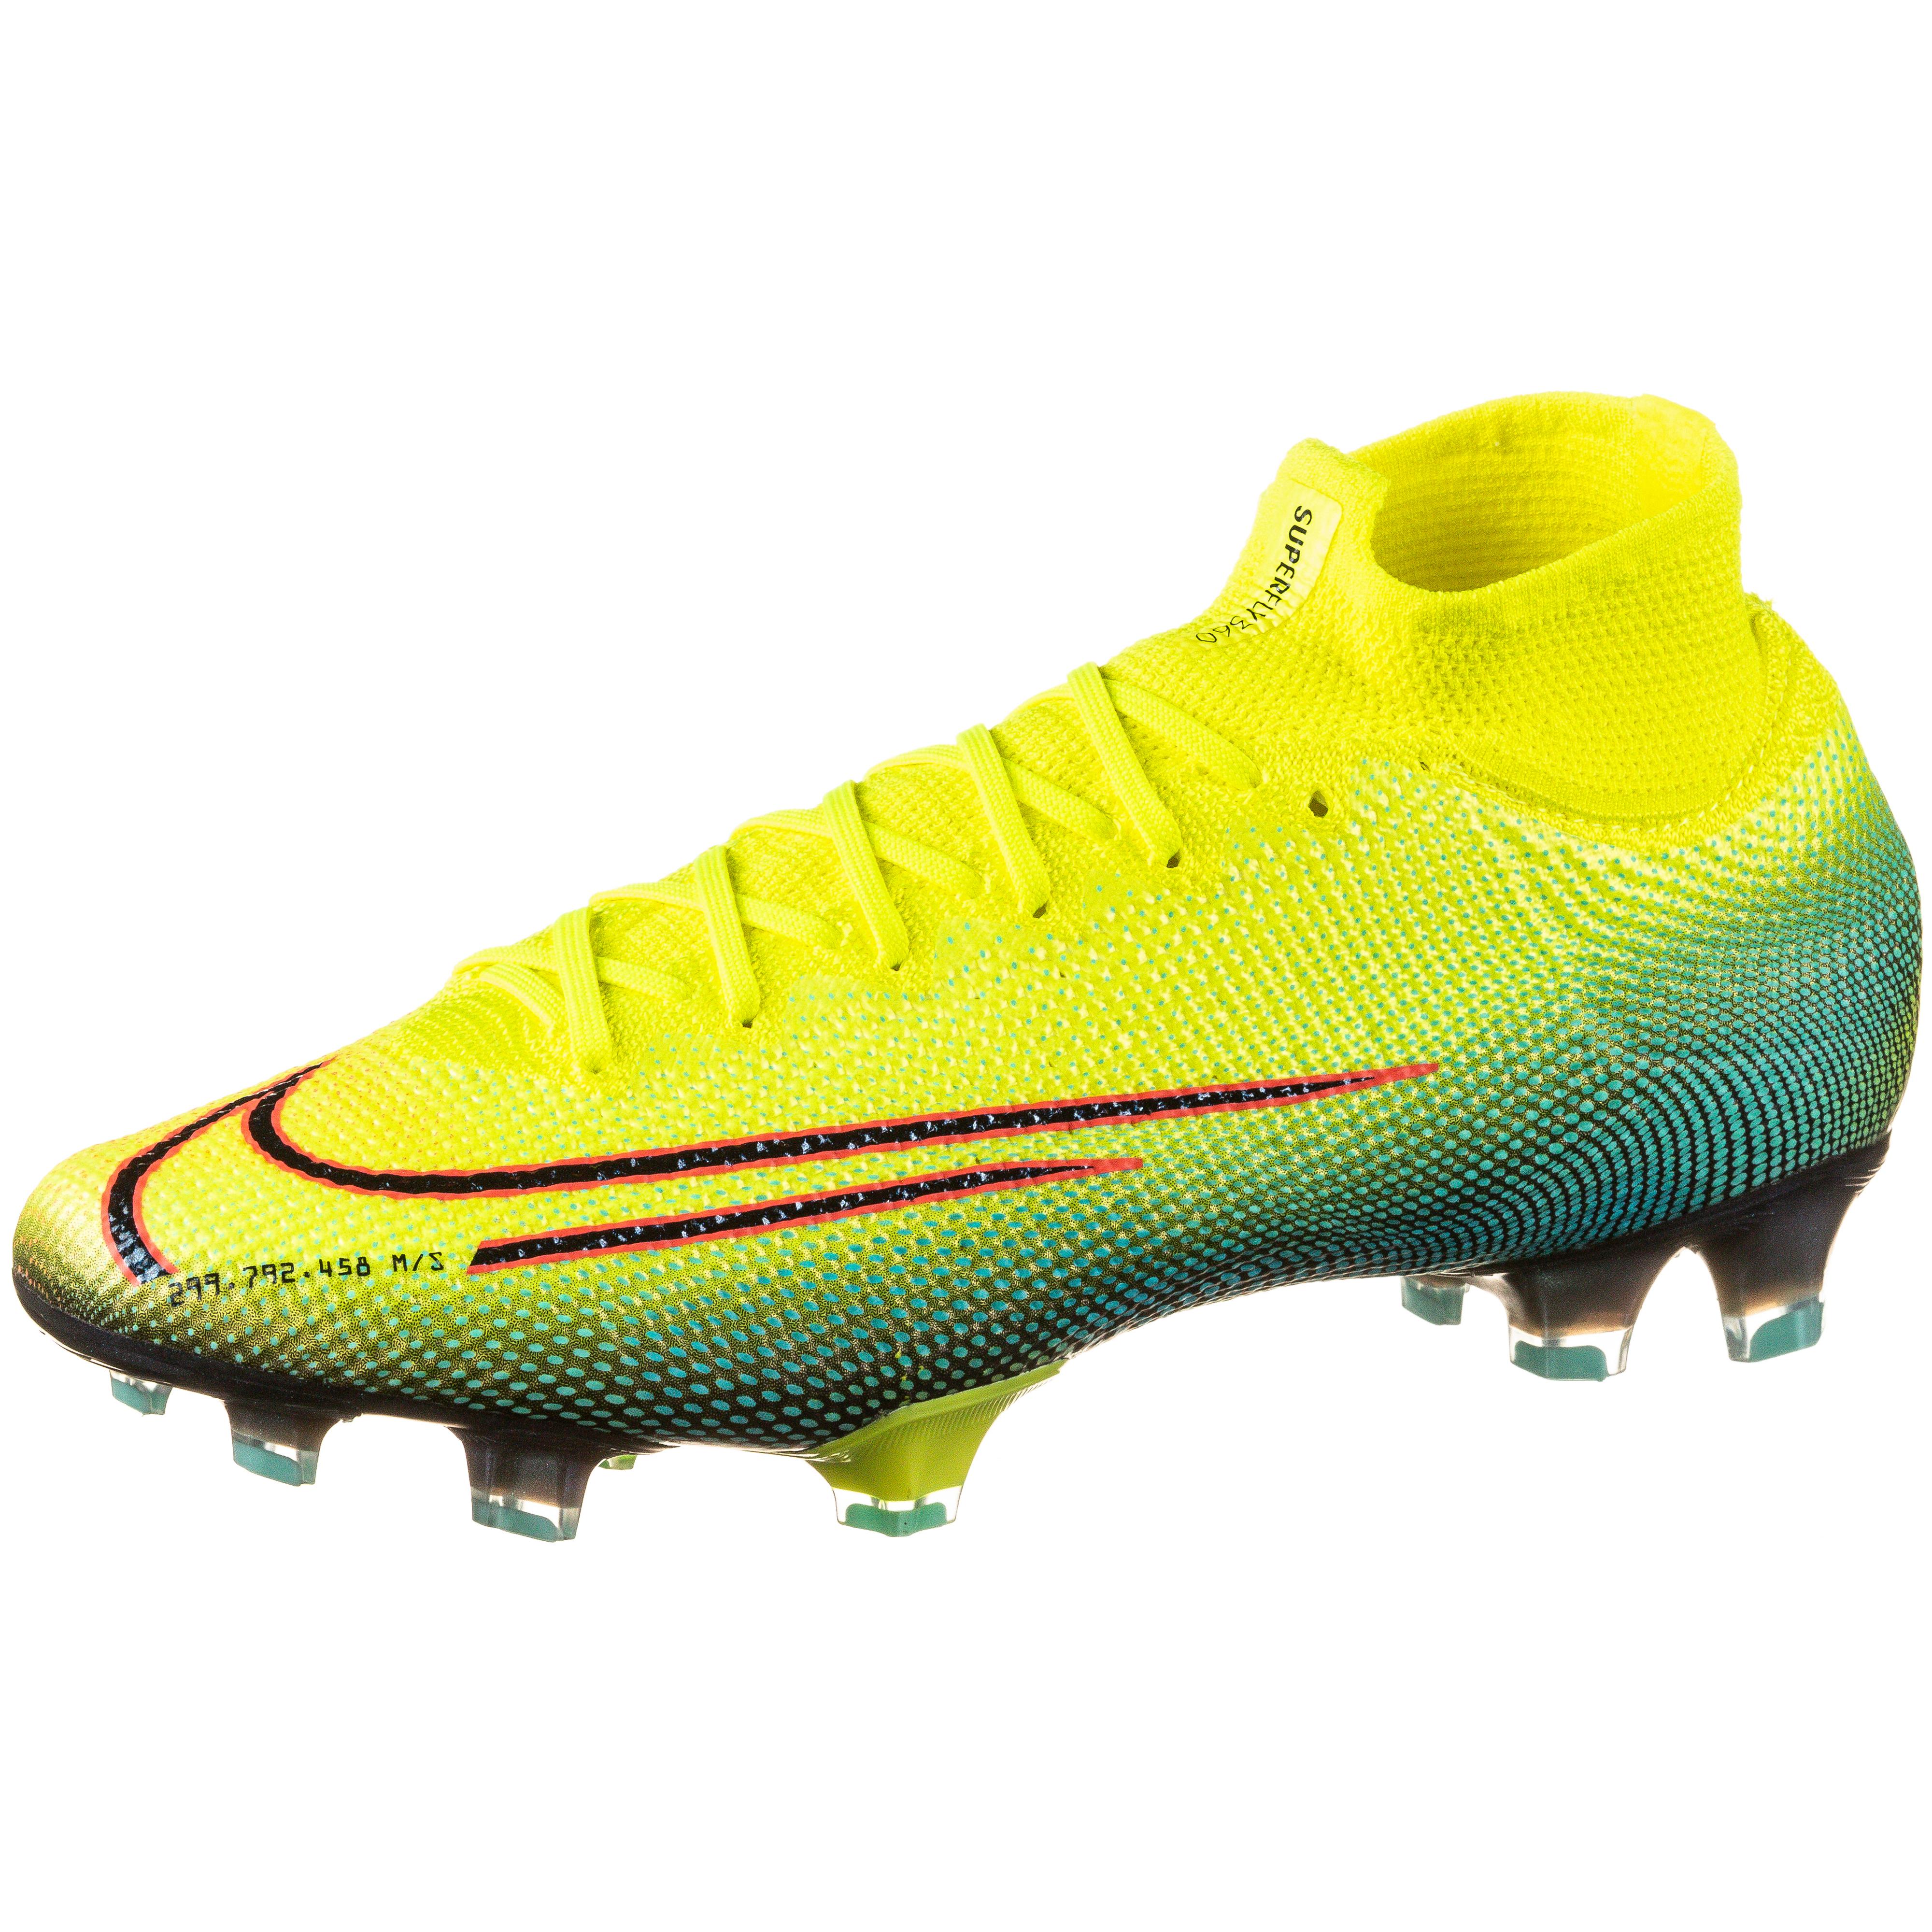 Nike Mercurial Superfly 7 Elite SE FG Firm Ground Football Boot